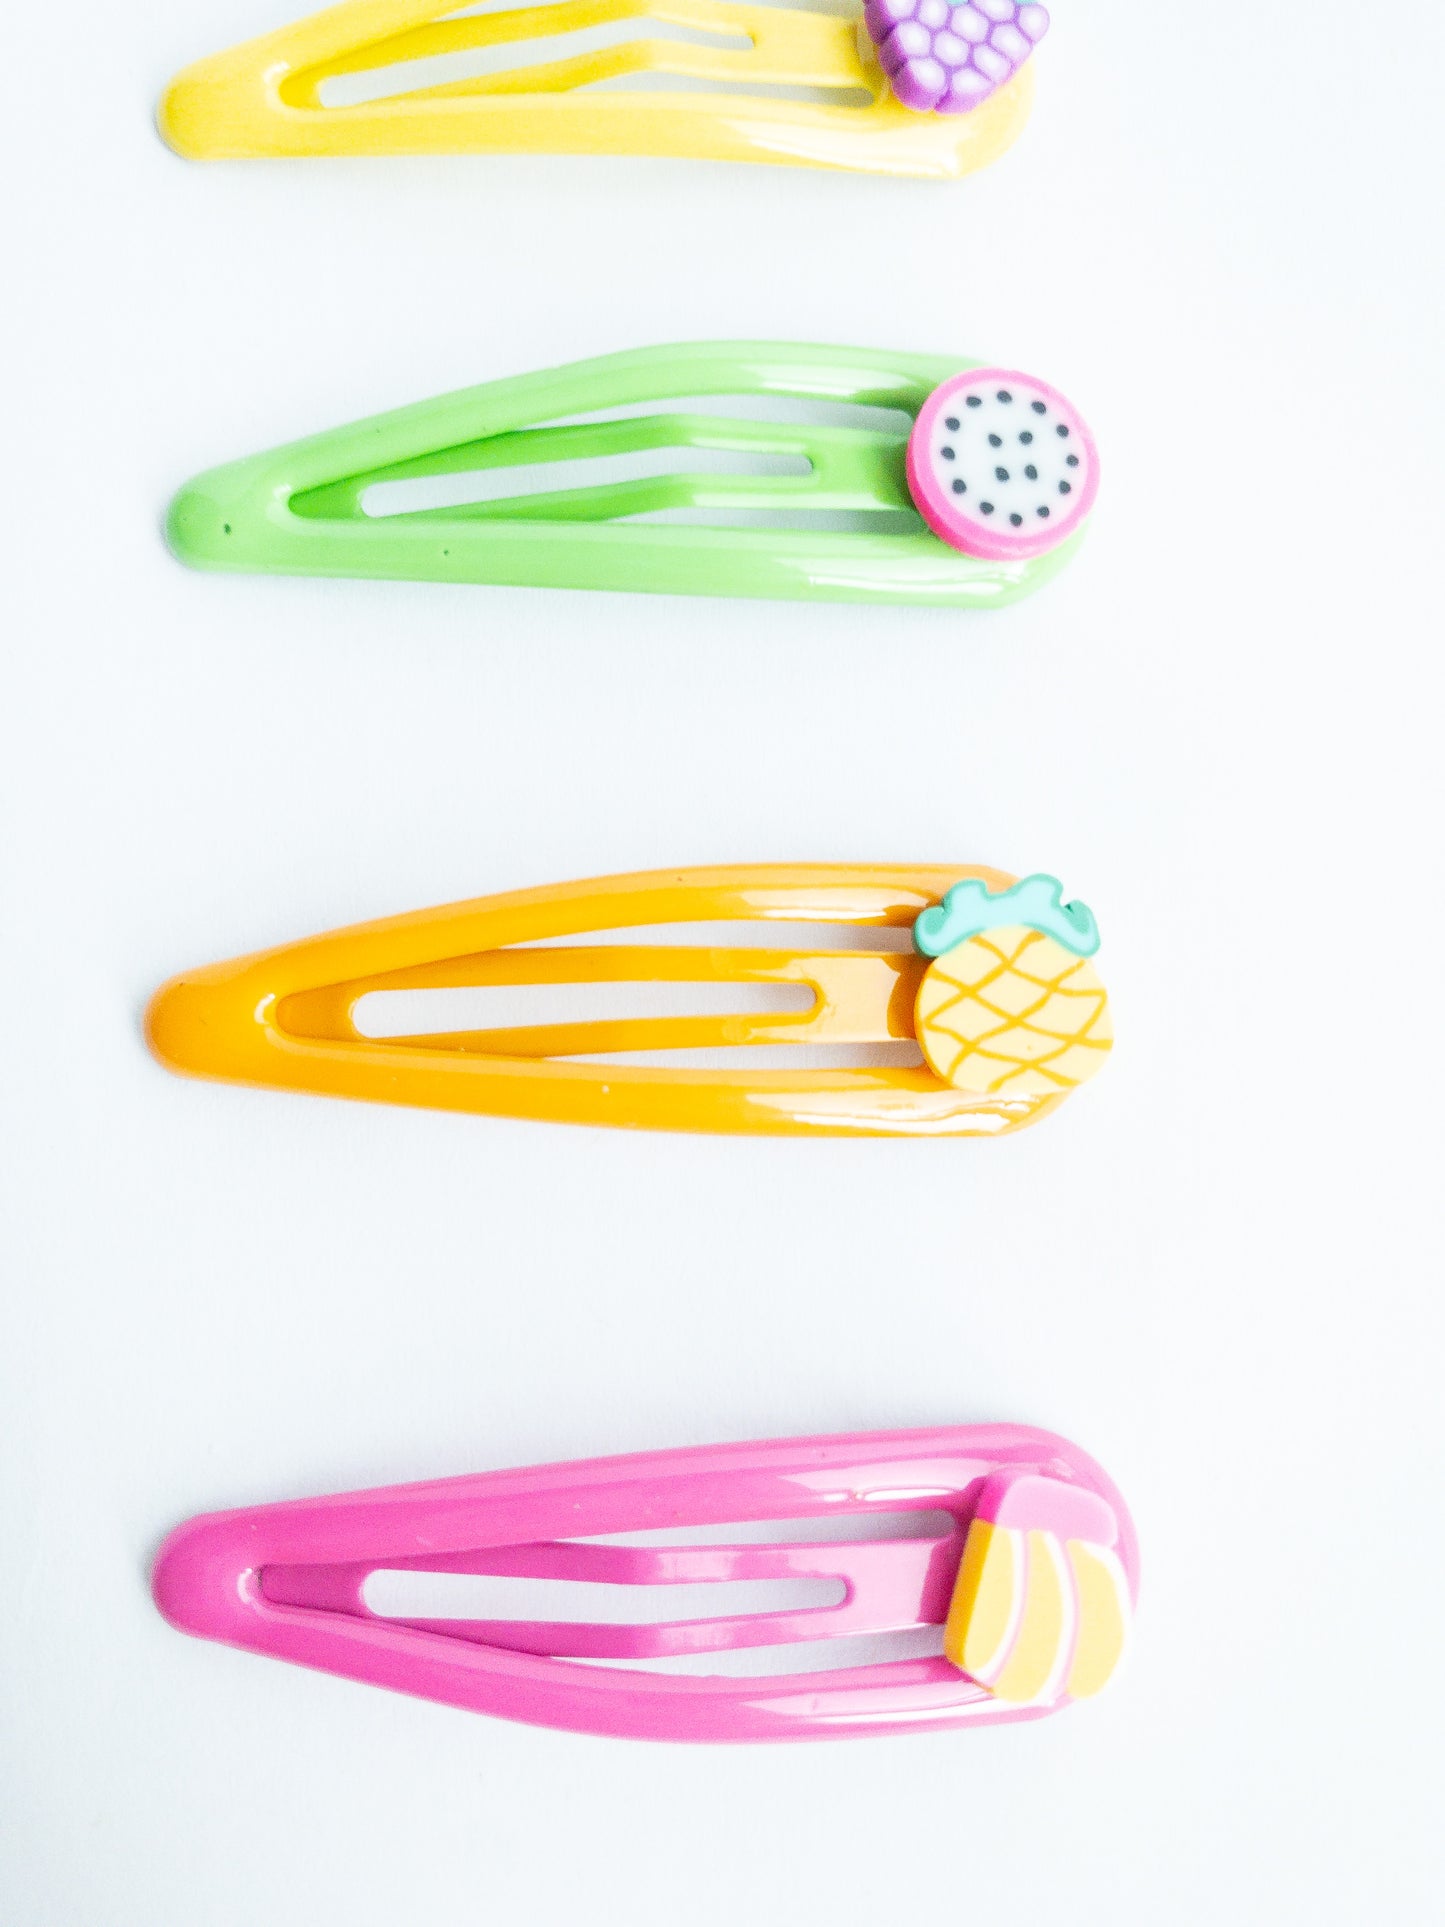 Add a sweet touch to your look with our adorable Little Fruits Hair Clips! These colorful clips come in a variety of fruit shapes and colors to brighten up any 'do. There's a dragon fruit, grapes, banana, cherry, and pineapple.